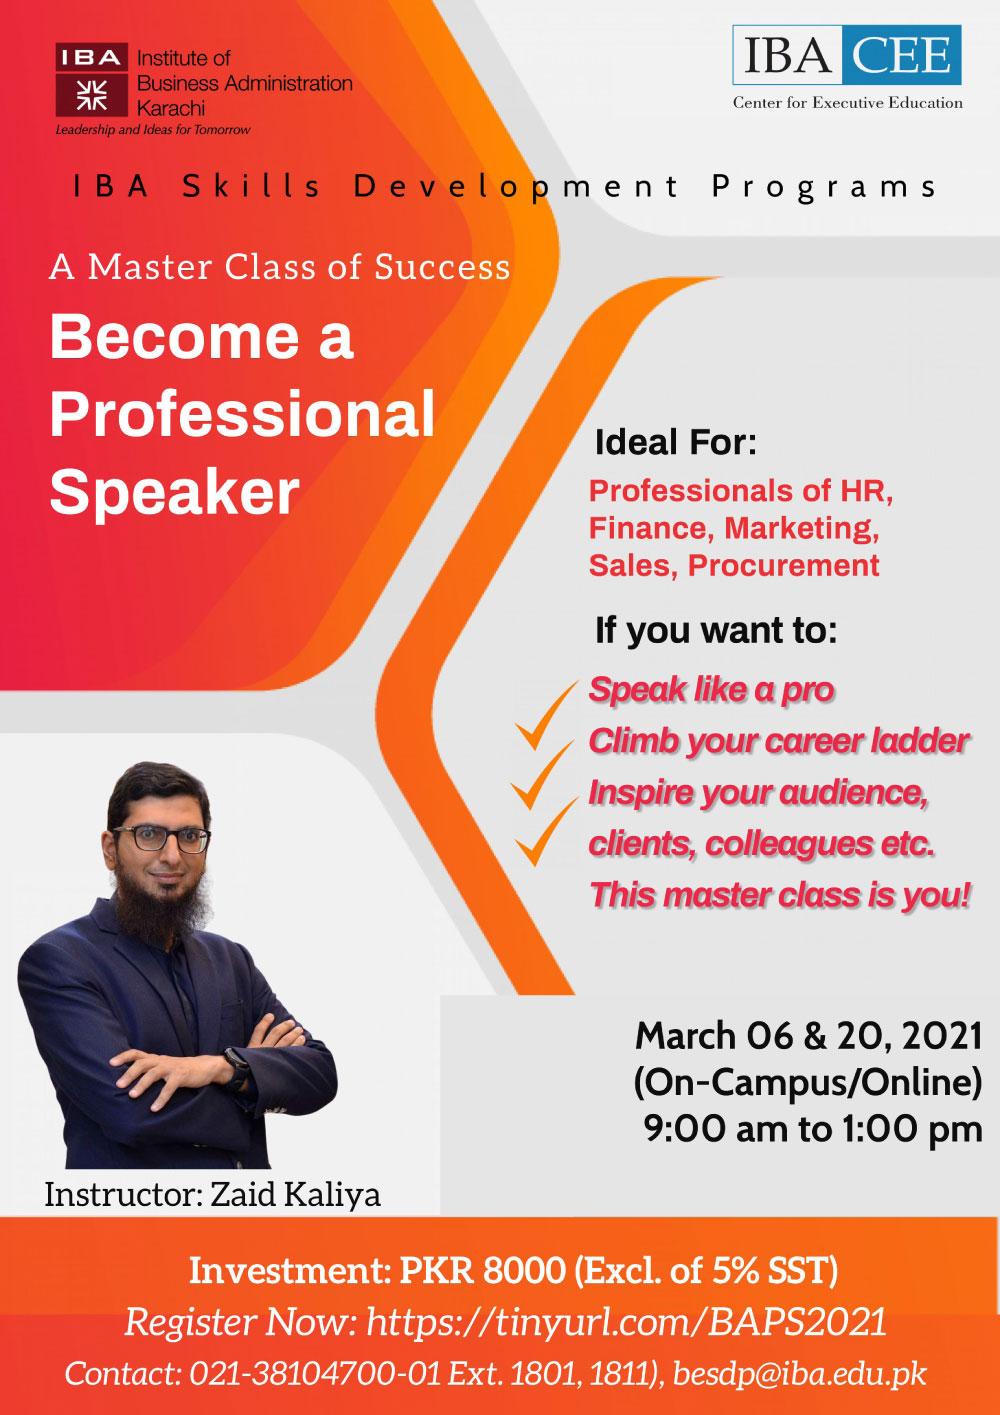 Become a Professional Speaker